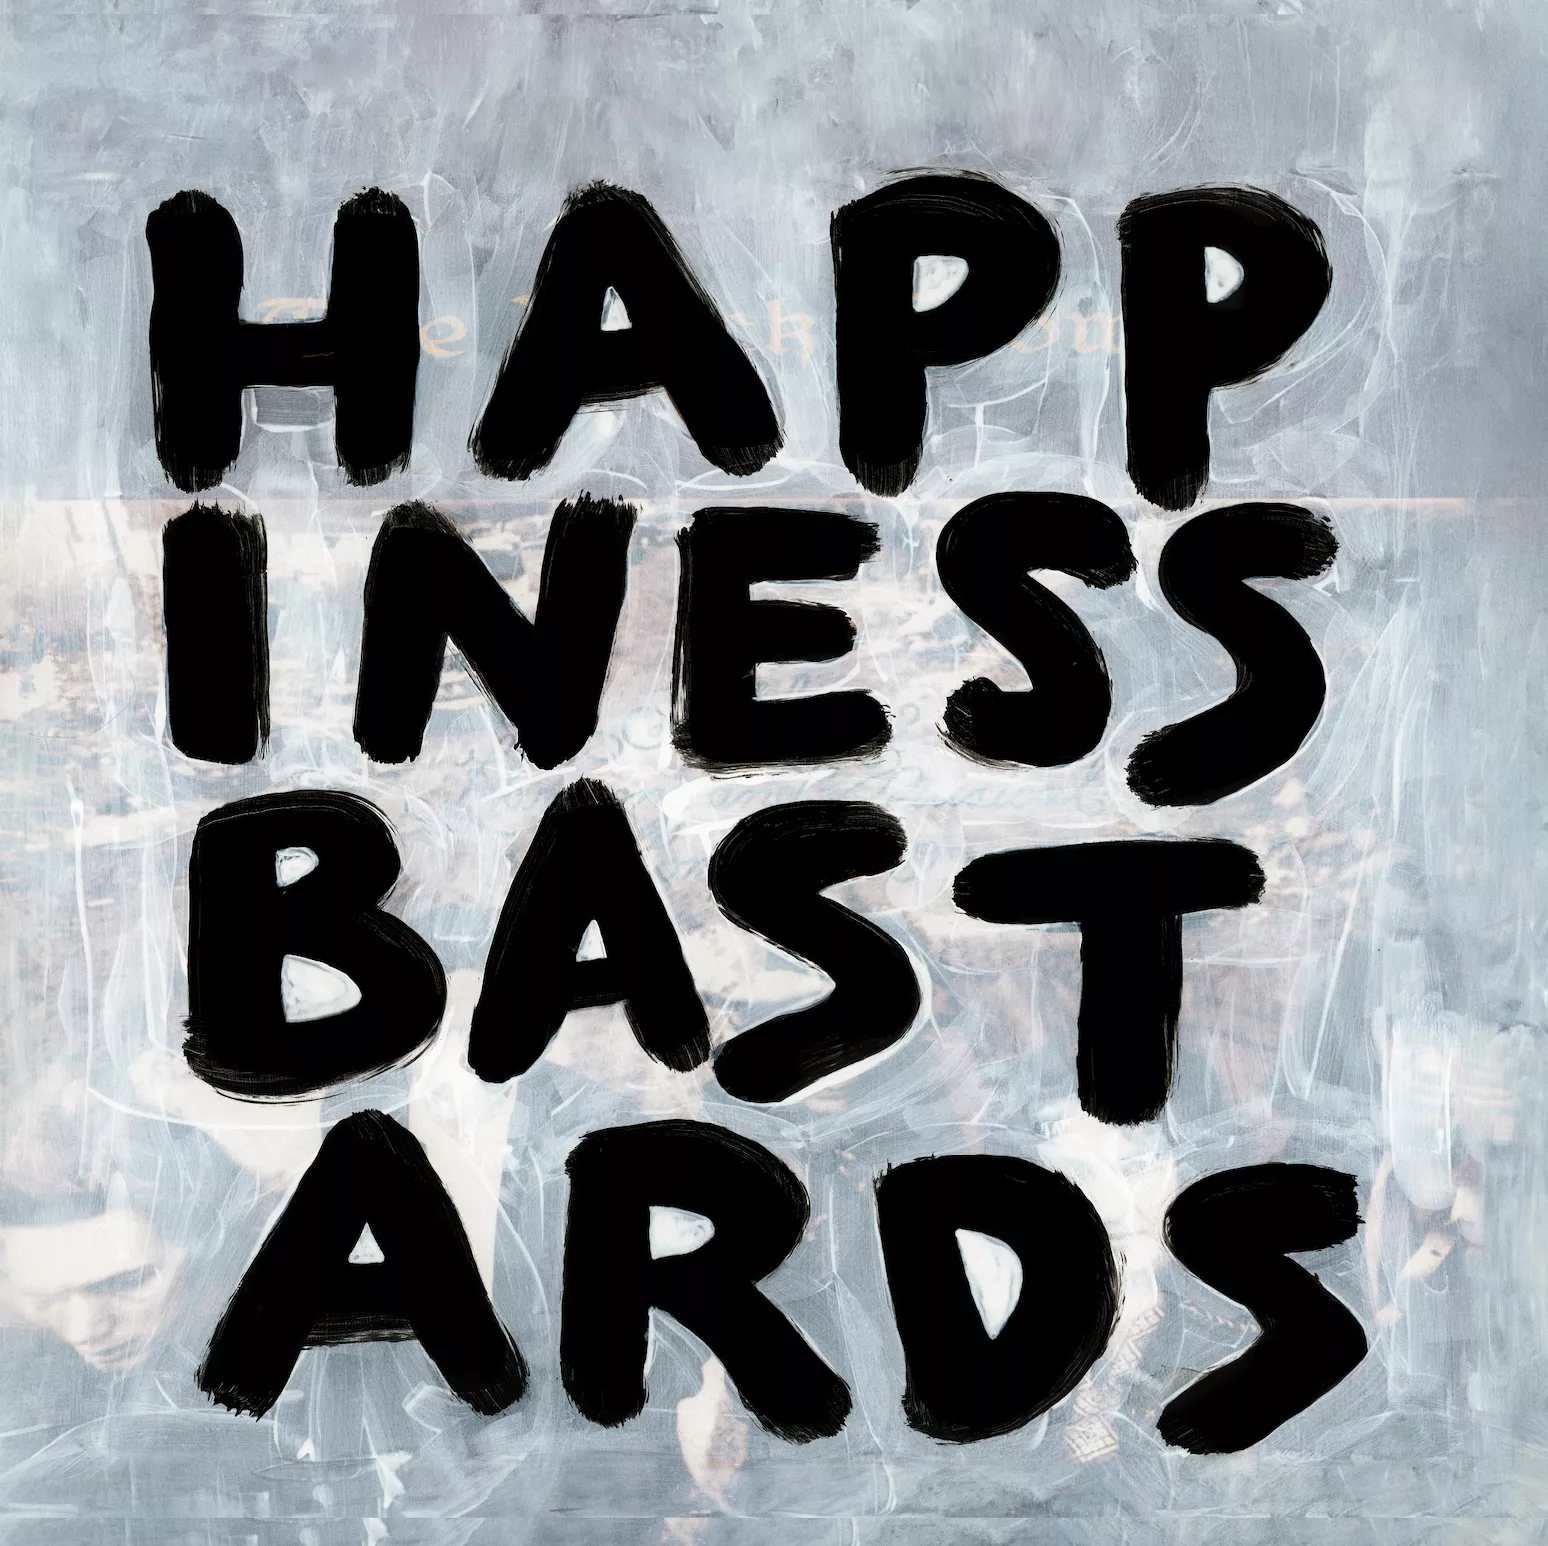 Happiness Bastards - The Black Crowes